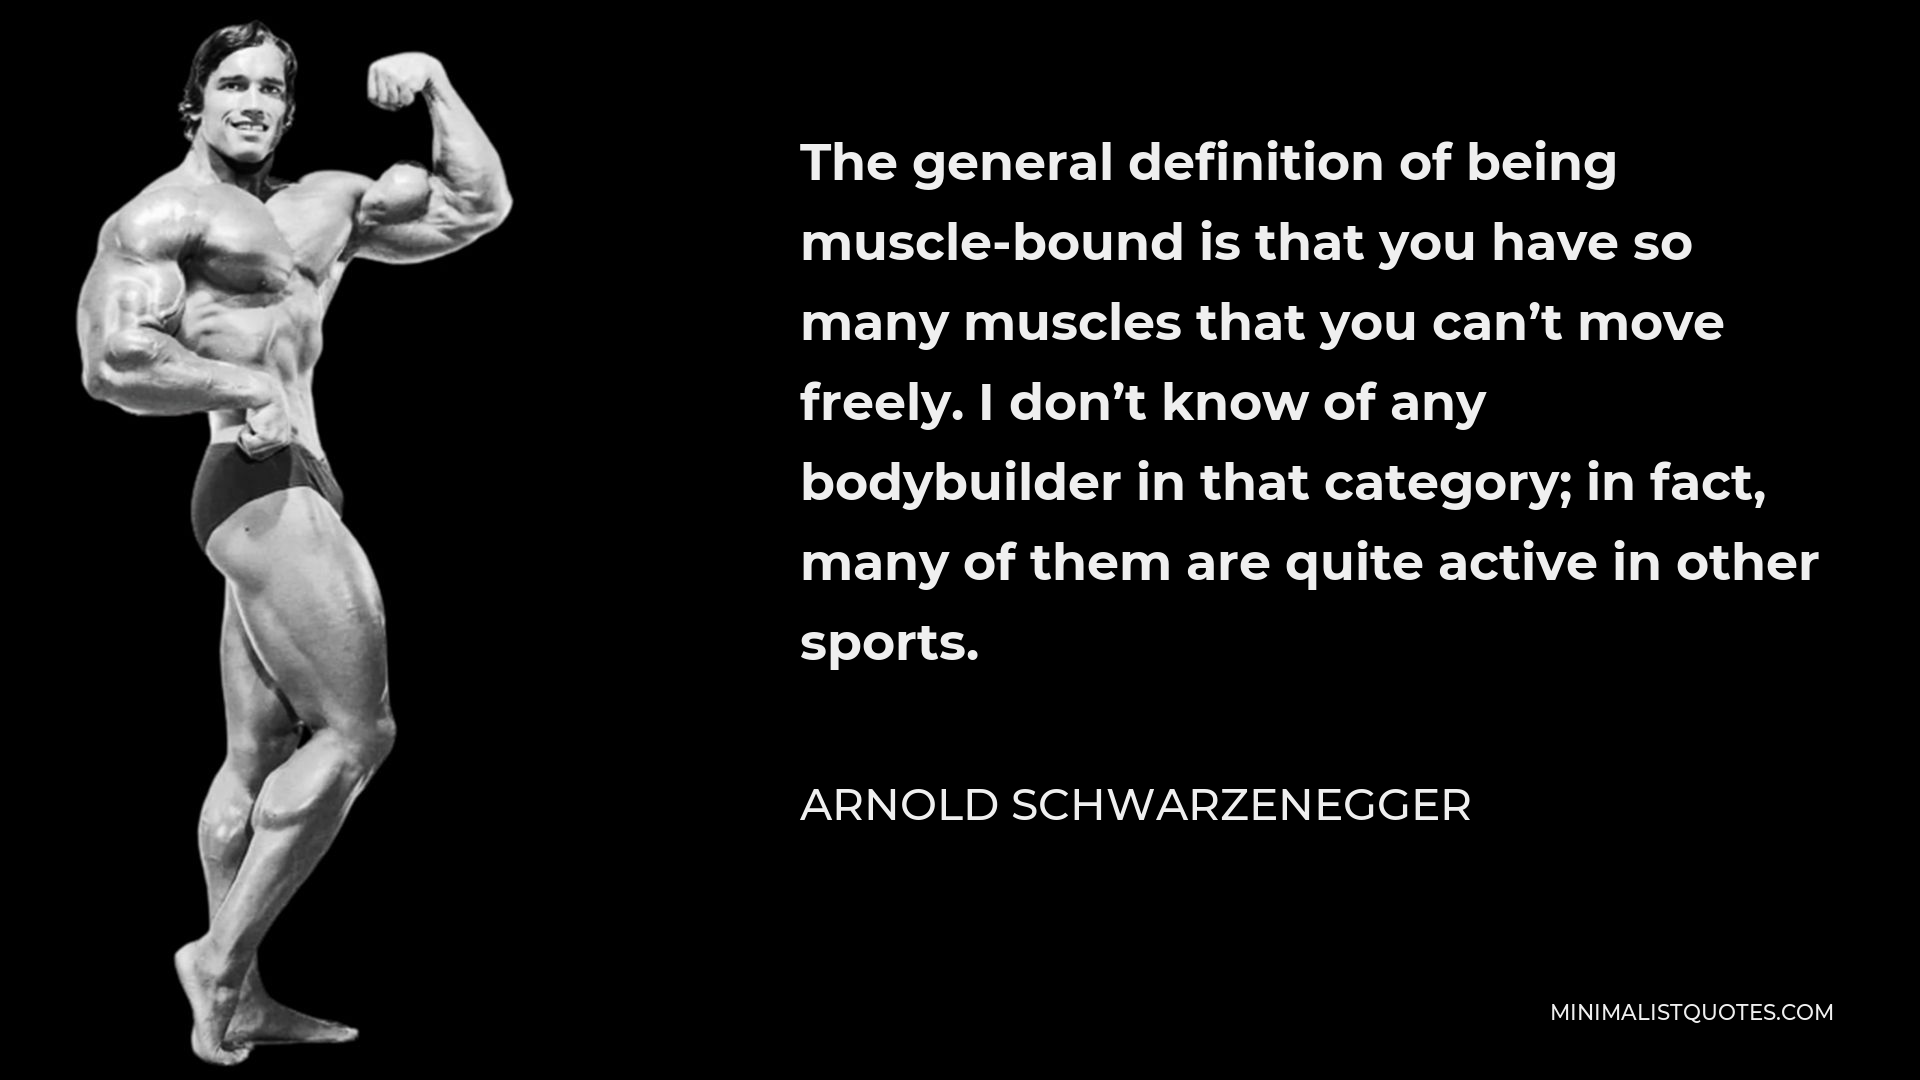 Arnold Schwarzenegger Quote - The general definition of being muscle-bound is that you have so many muscles that you can’t move freely. I don’t know of any bodybuilder in that category; in fact, many of them are quite active in other sports.